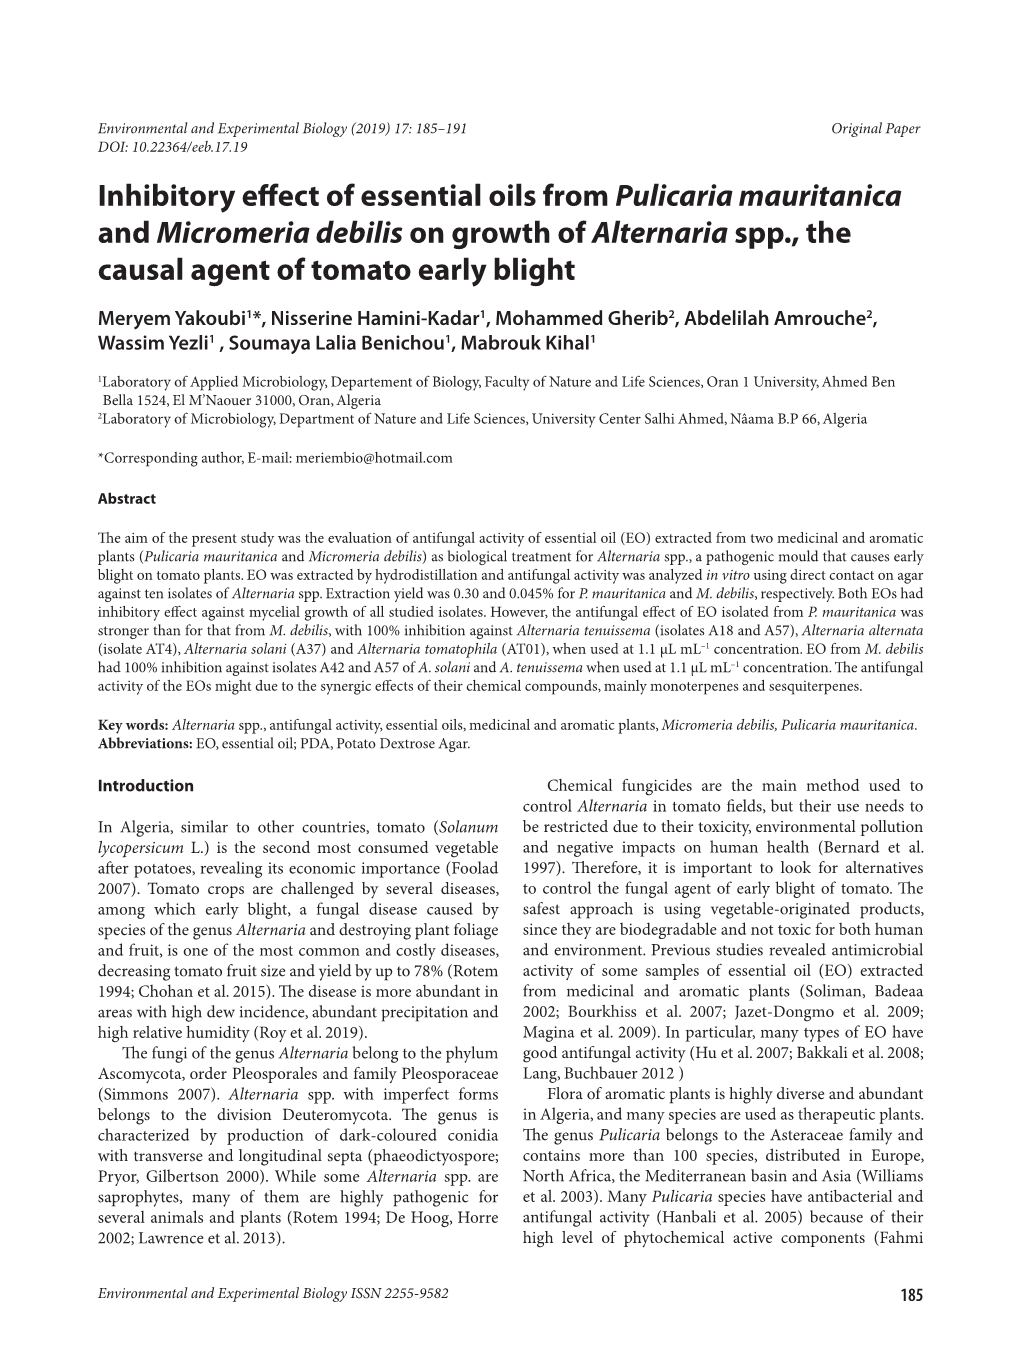 Inhibitory Effect of Essential Oils from Pulicaria Mauritanica And